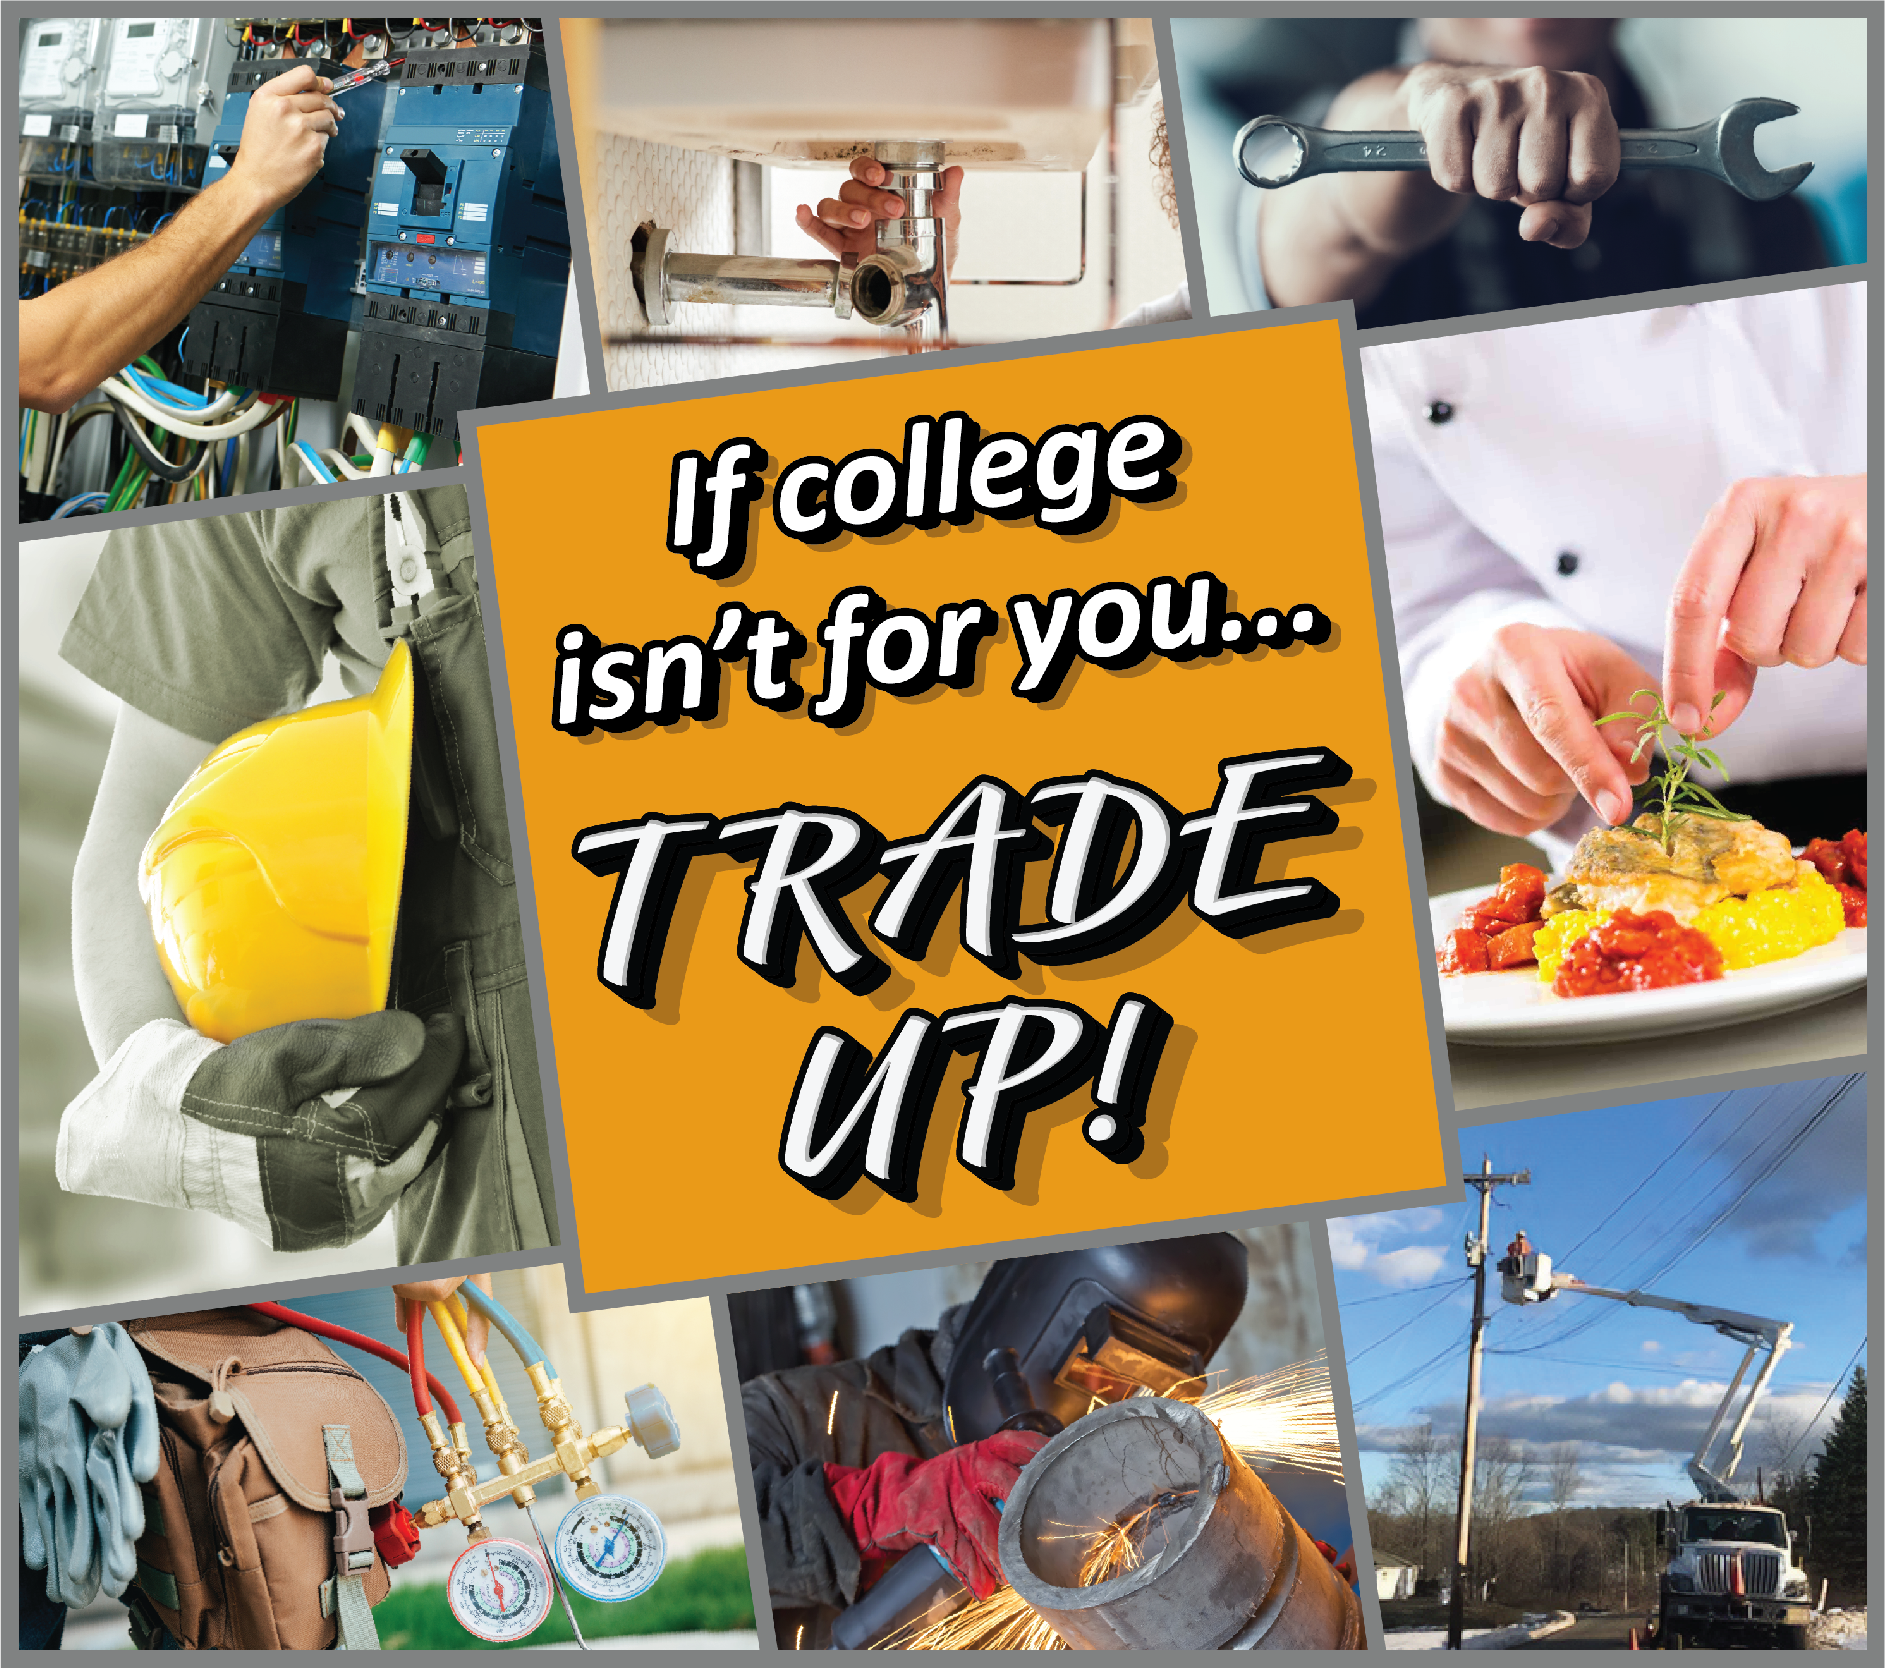 Collage of photos of various trade professionals. In the center is a tilted orange square that says "If college isn't for you... TRADE UP!"